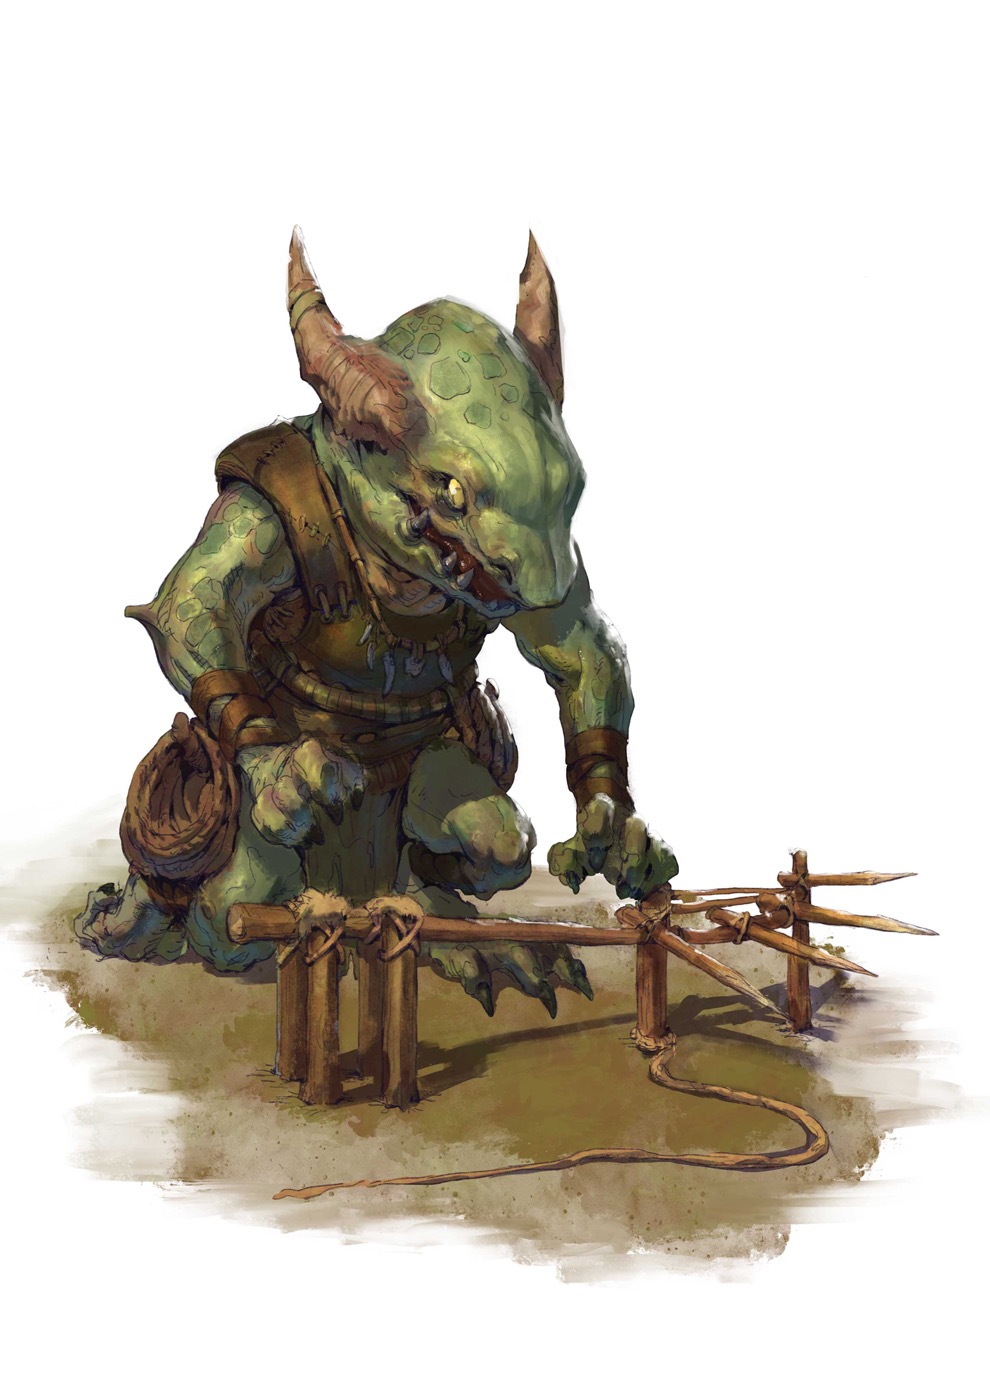 A green-scaled kobold leans over a trap she’s crafting out of wooden spikes and bent tree branches.